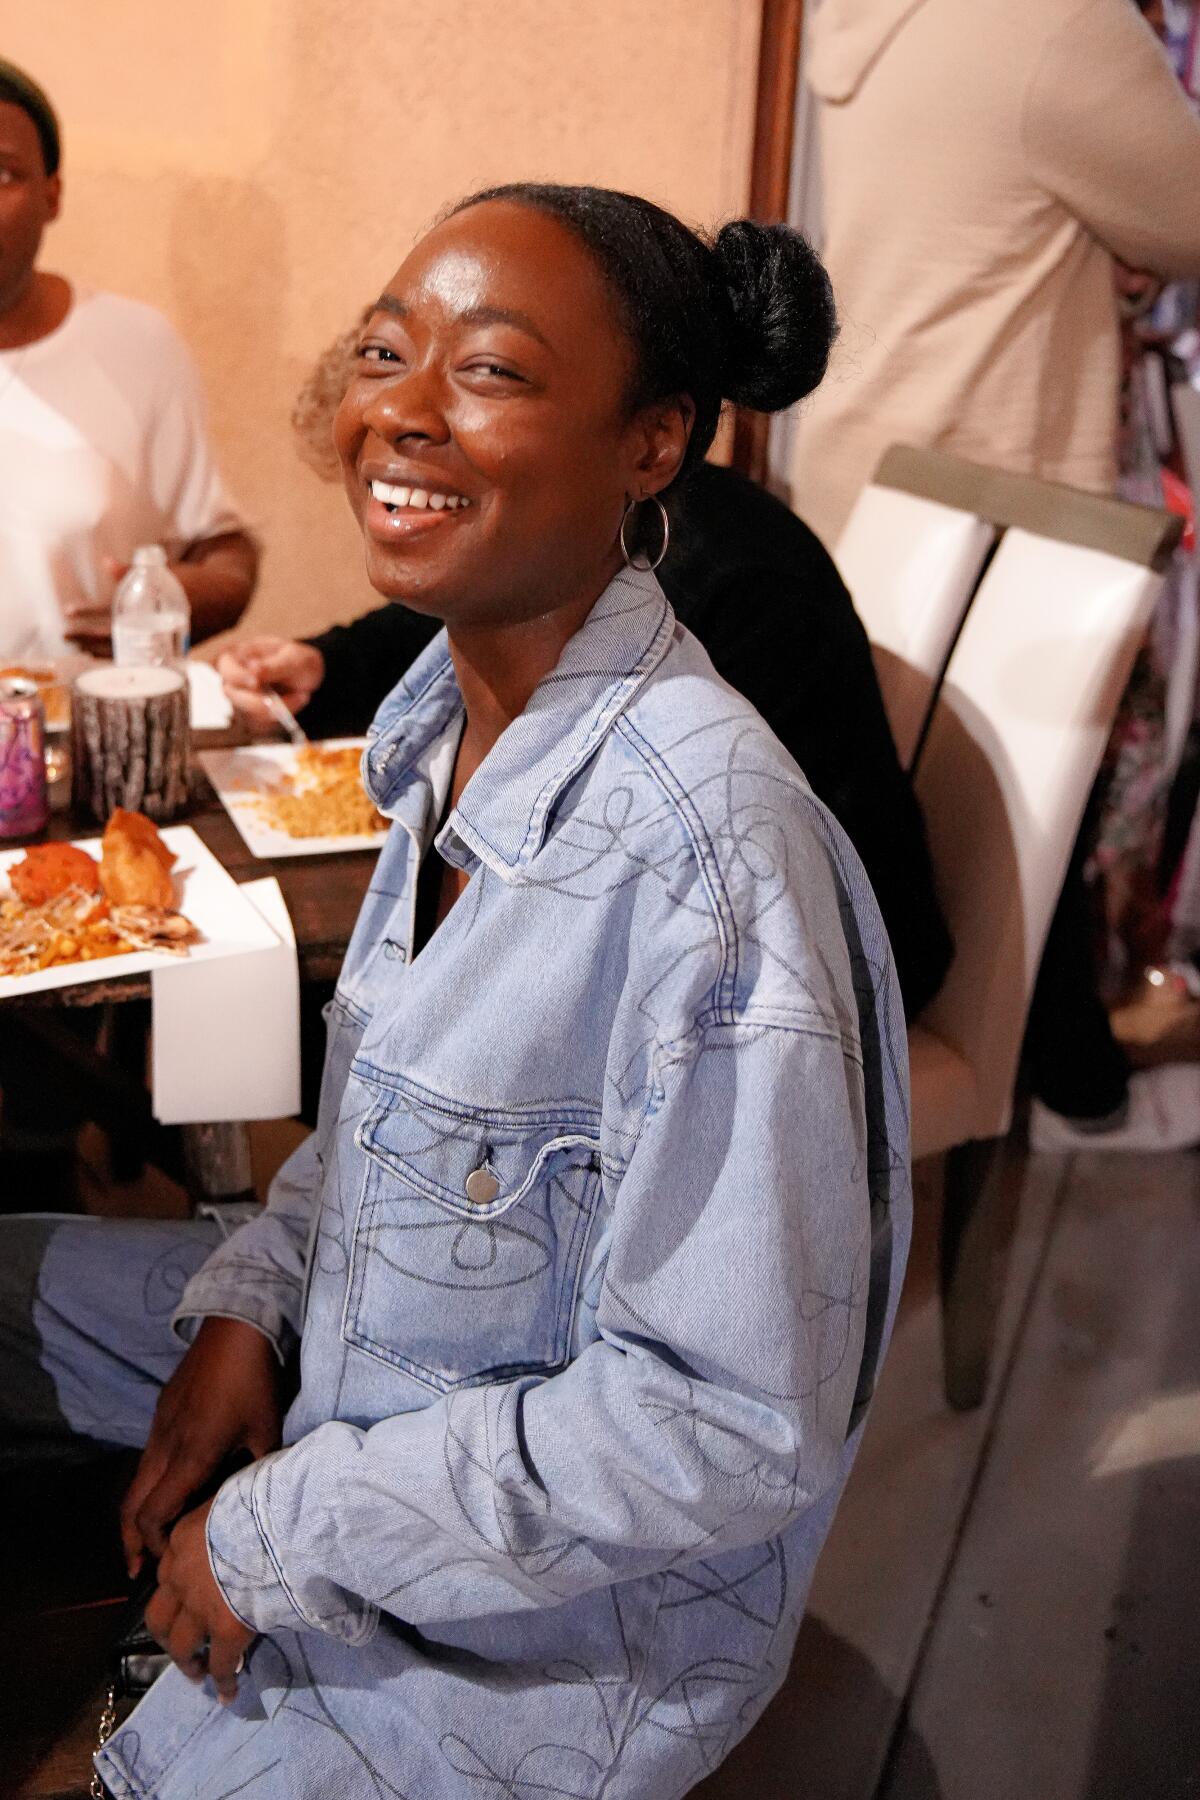 A young woman dressed in a jean jacket, smiling.